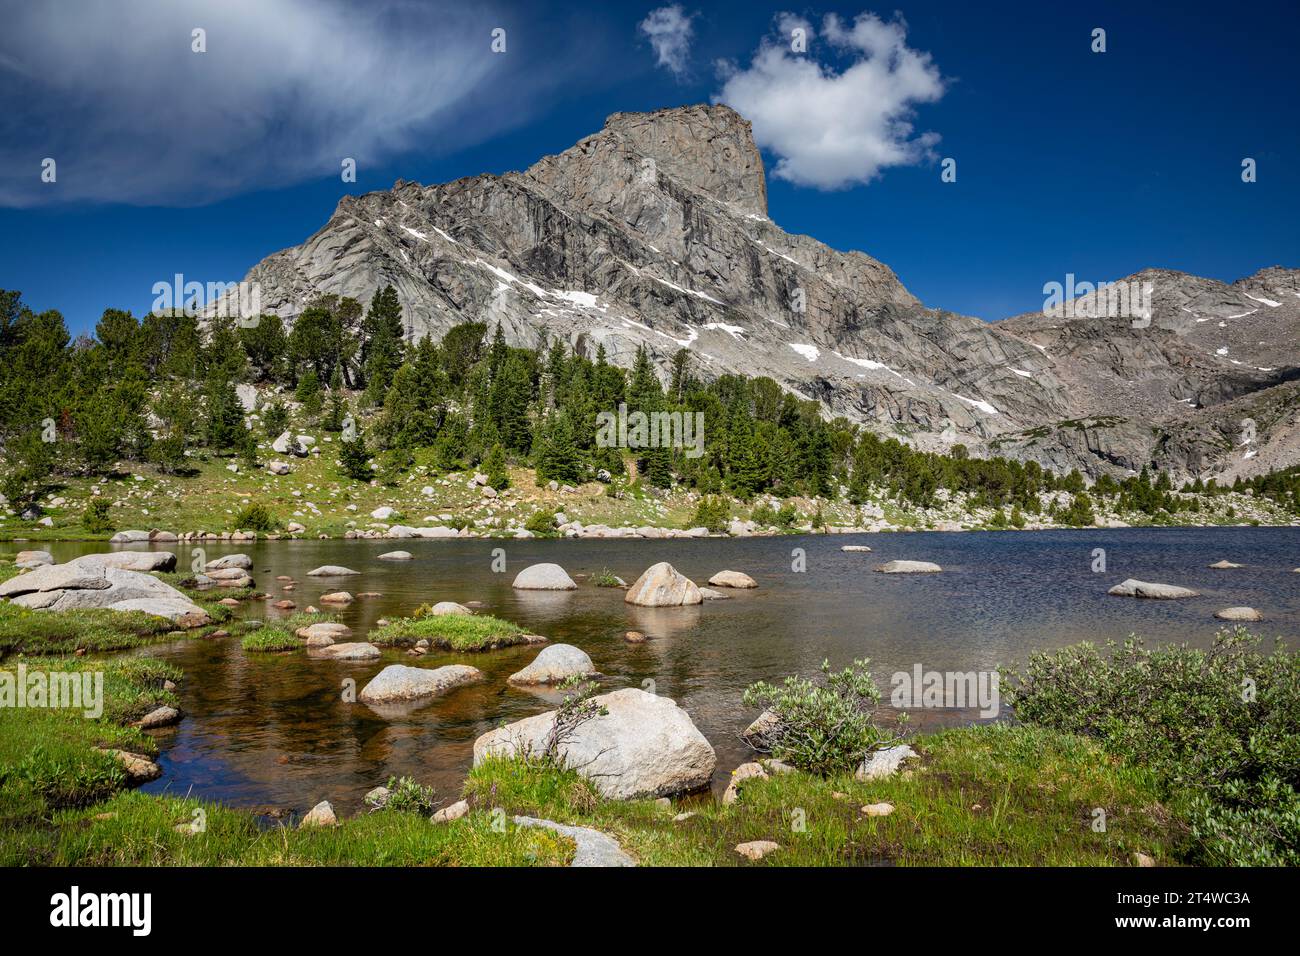 WA05567-00...WYOMING - The first Bear Lake and Lizard Head Peak in the Popo Agie Wilderness section of the Wind River Range. Stock Photo